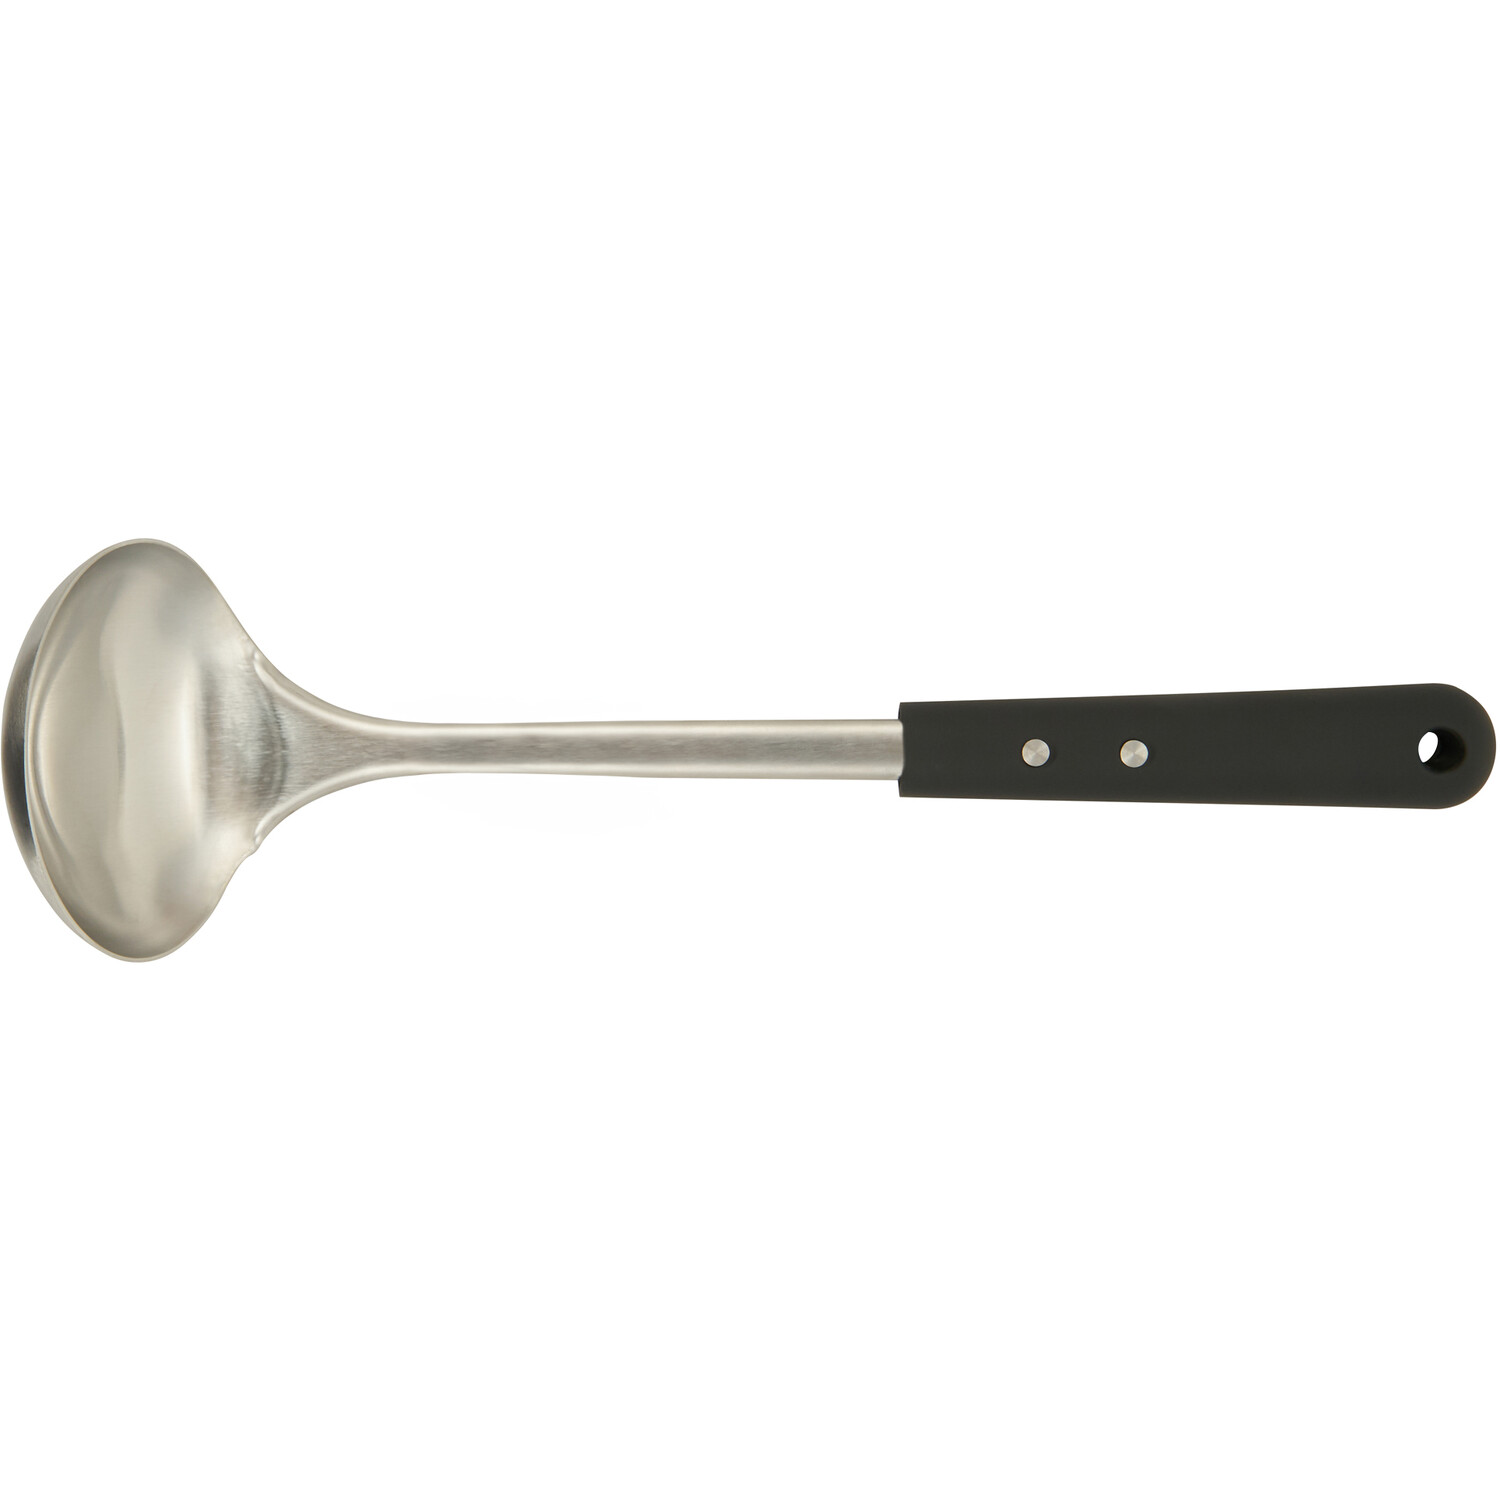 Kitchenmaster Stainless Steel Ladle with Black Soft Touch Handle Image 5